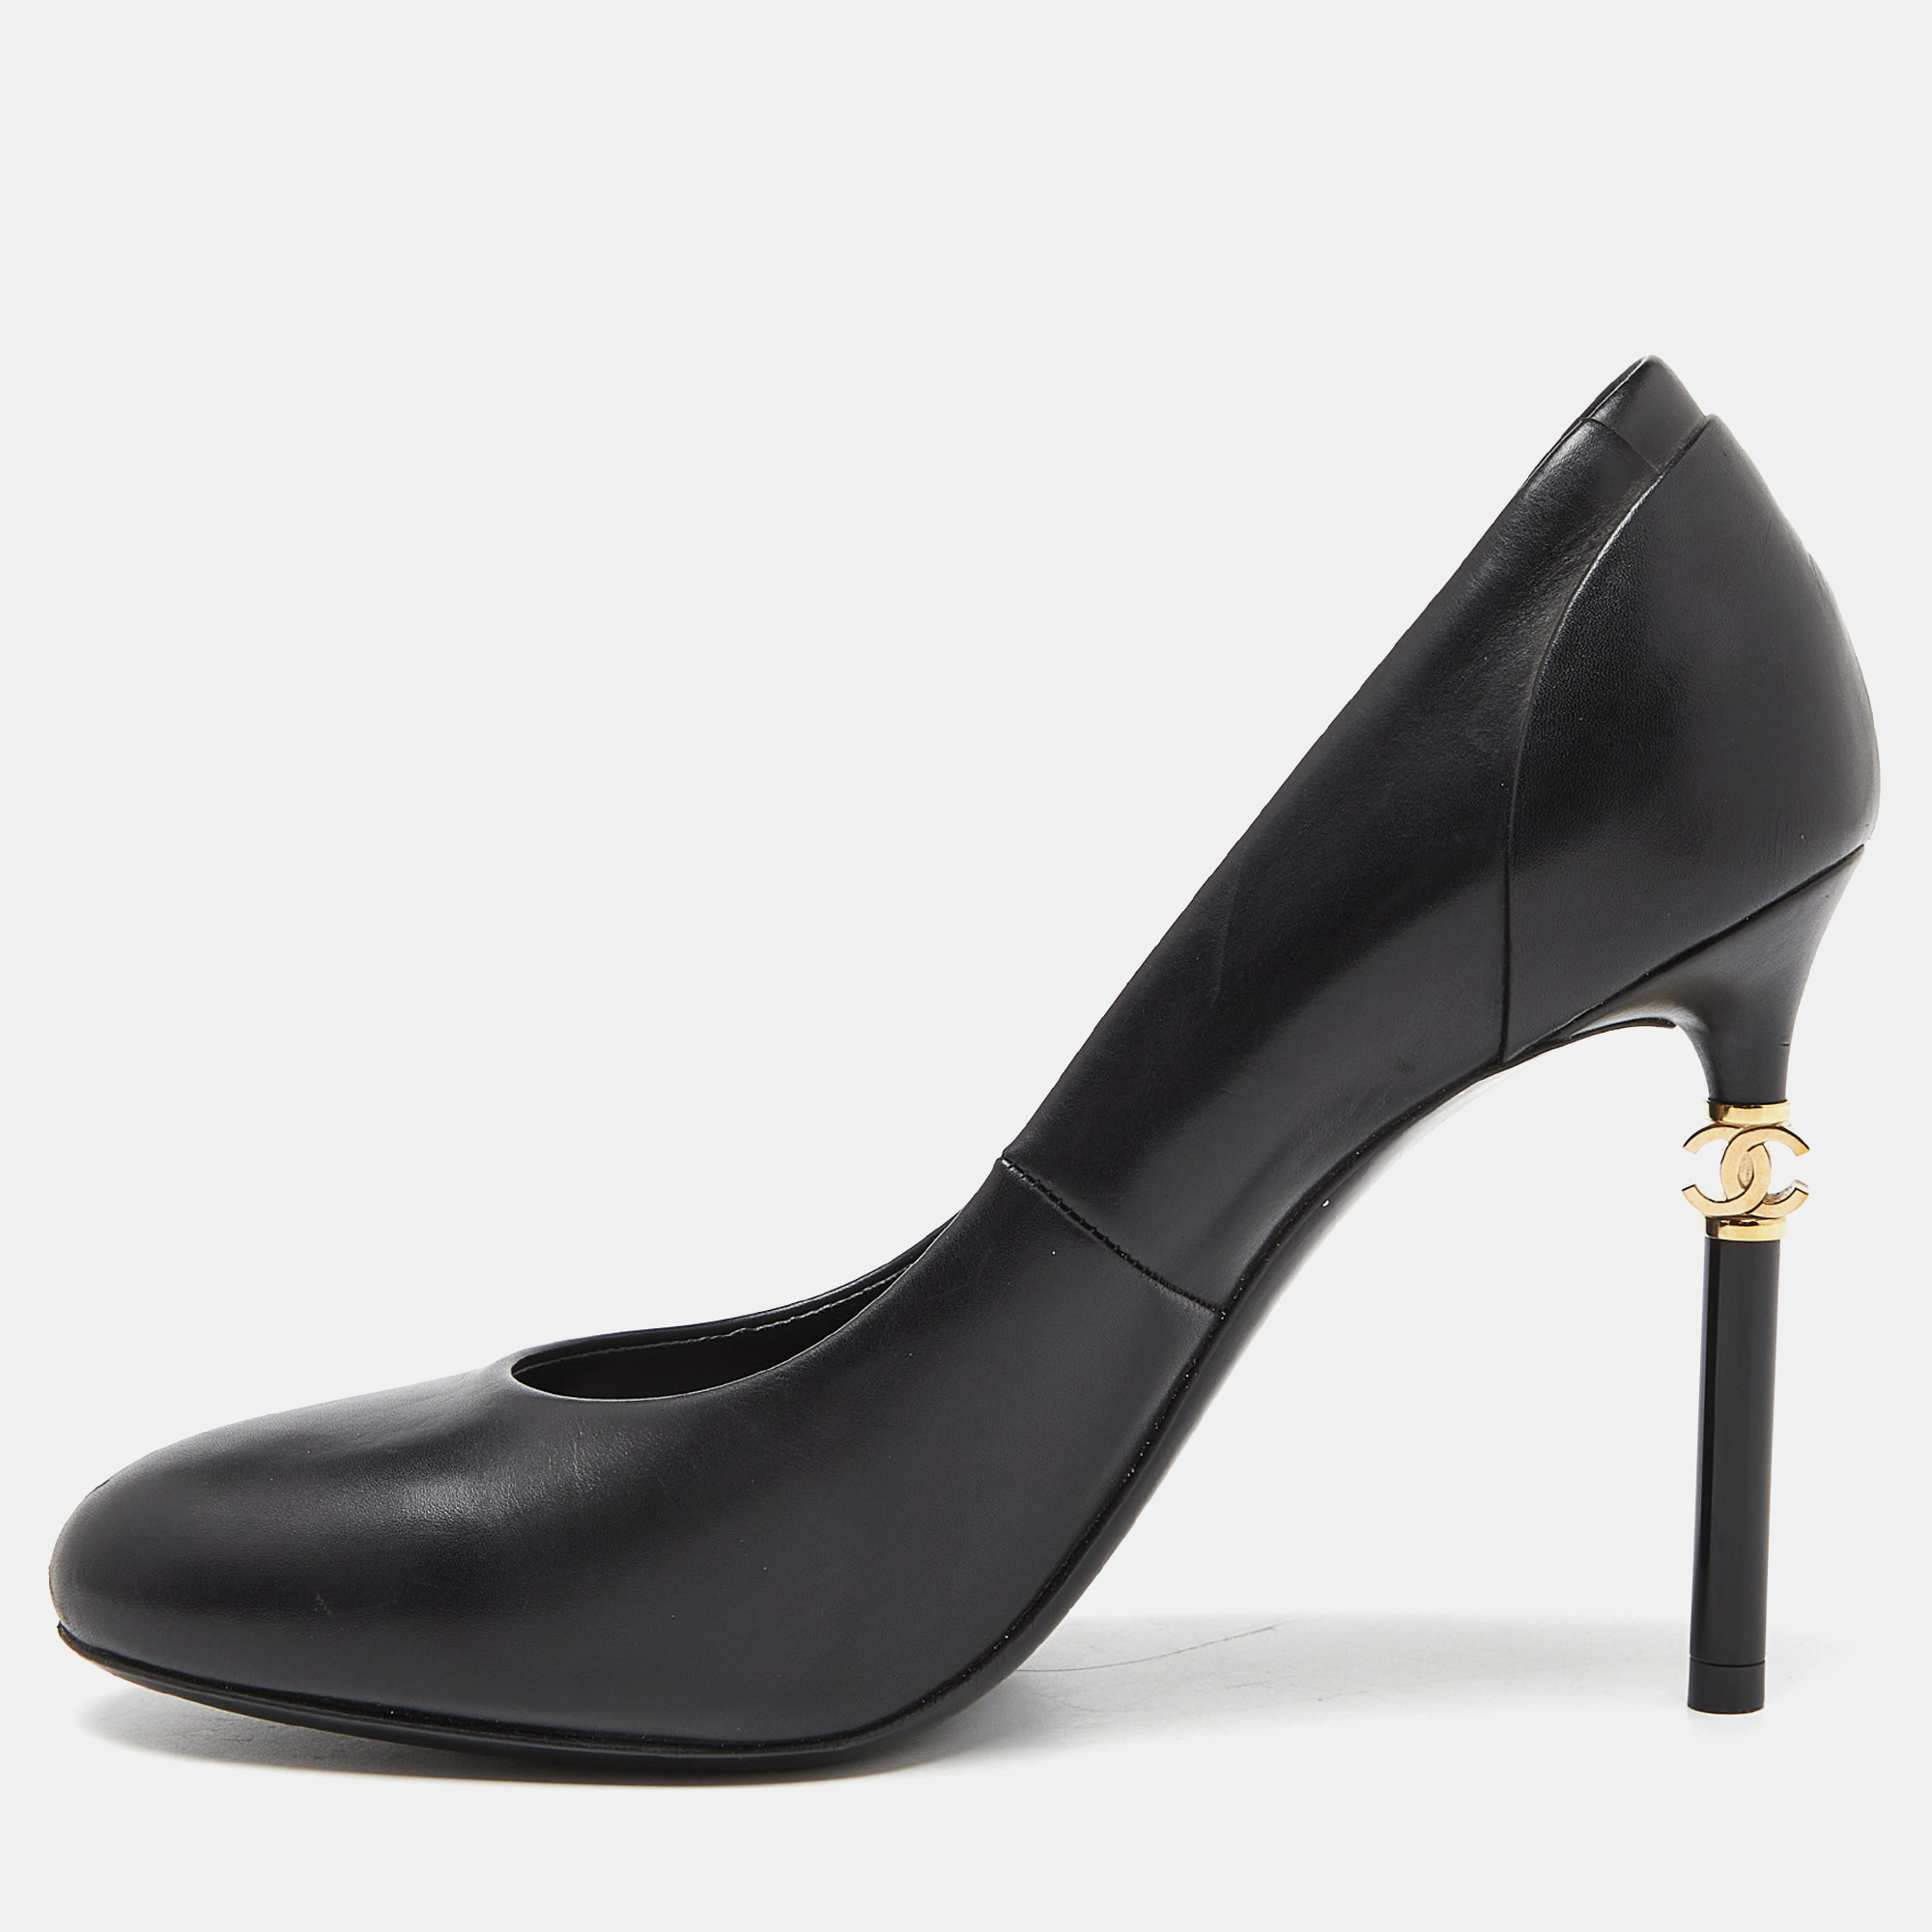 Chanel black leather pointed toe pumps size 38.5